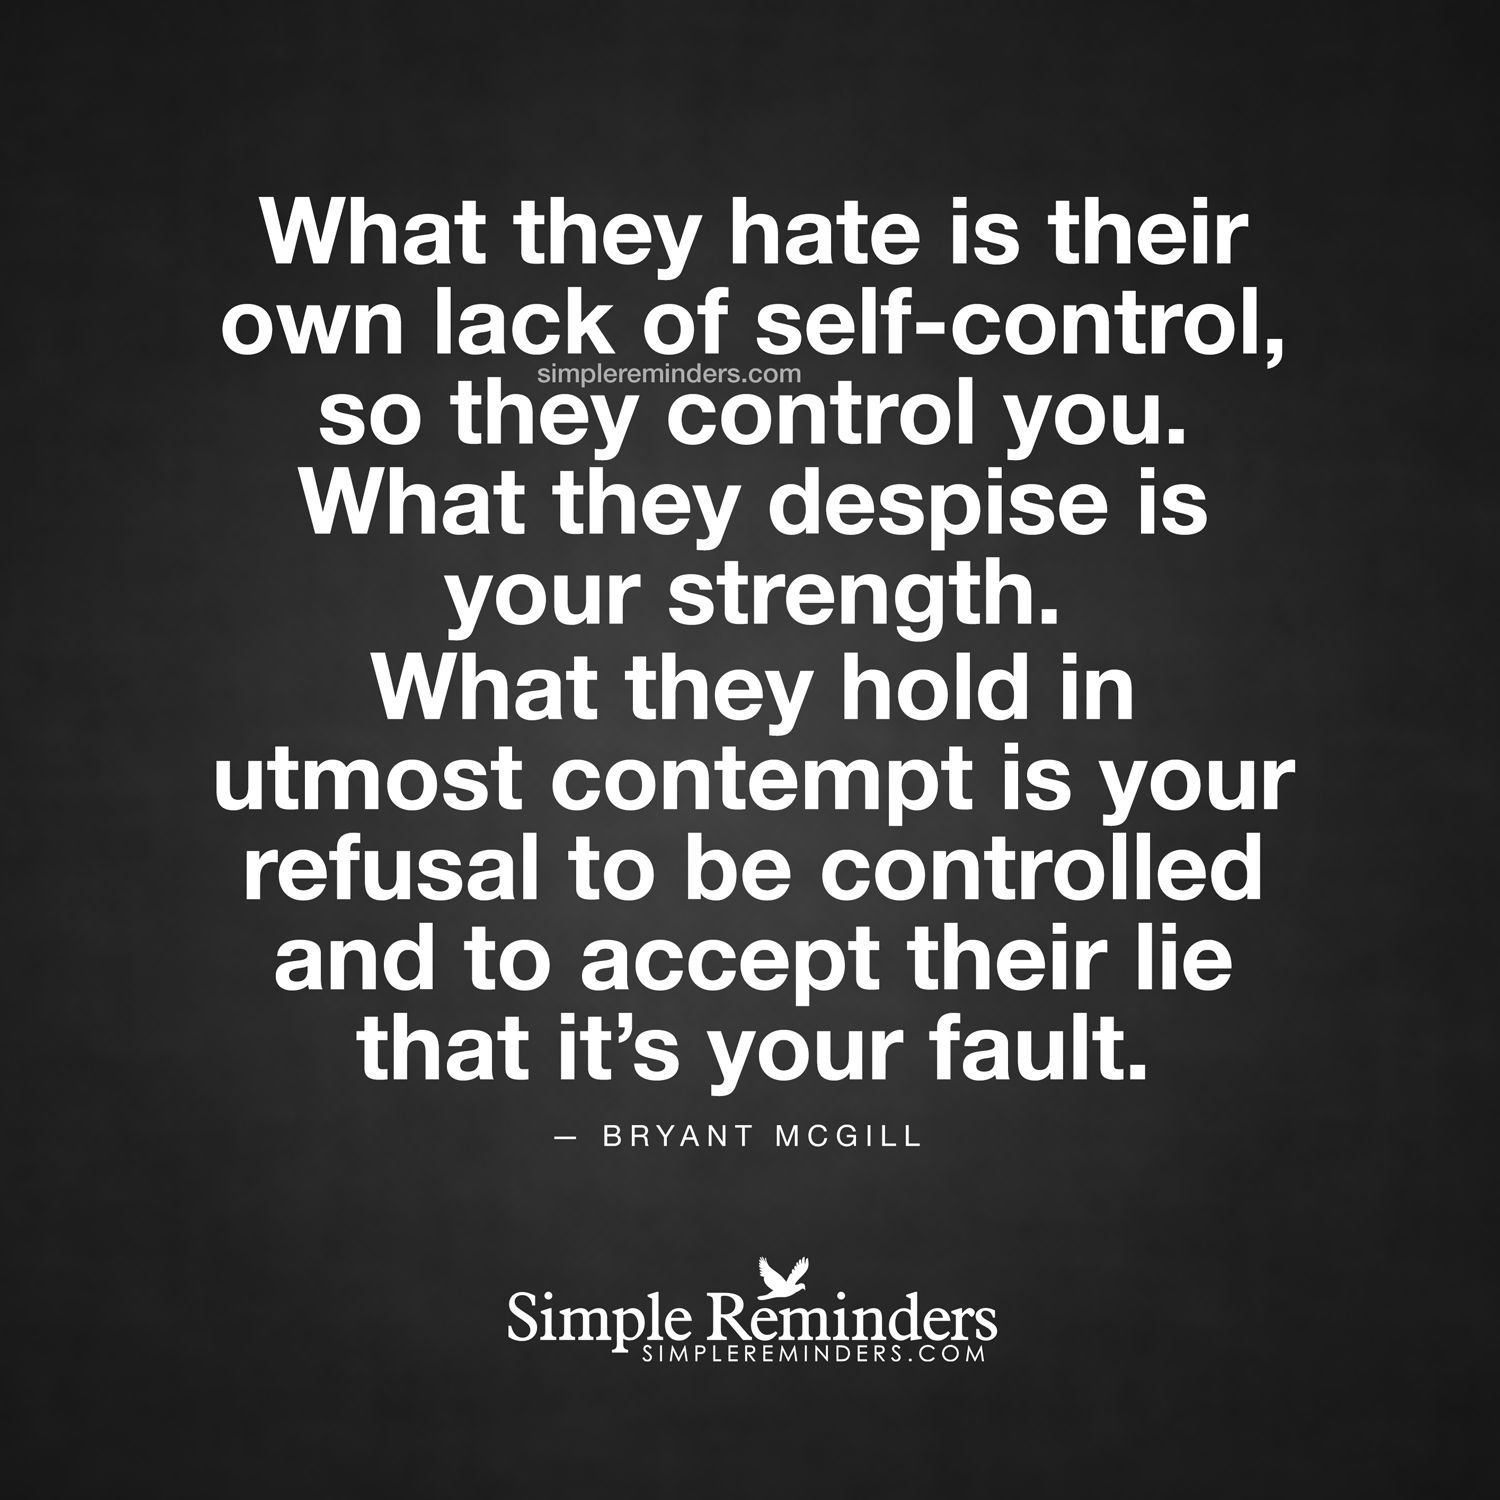 What they hate is their own lack of self-control, so they control you. What they despise is your strength.